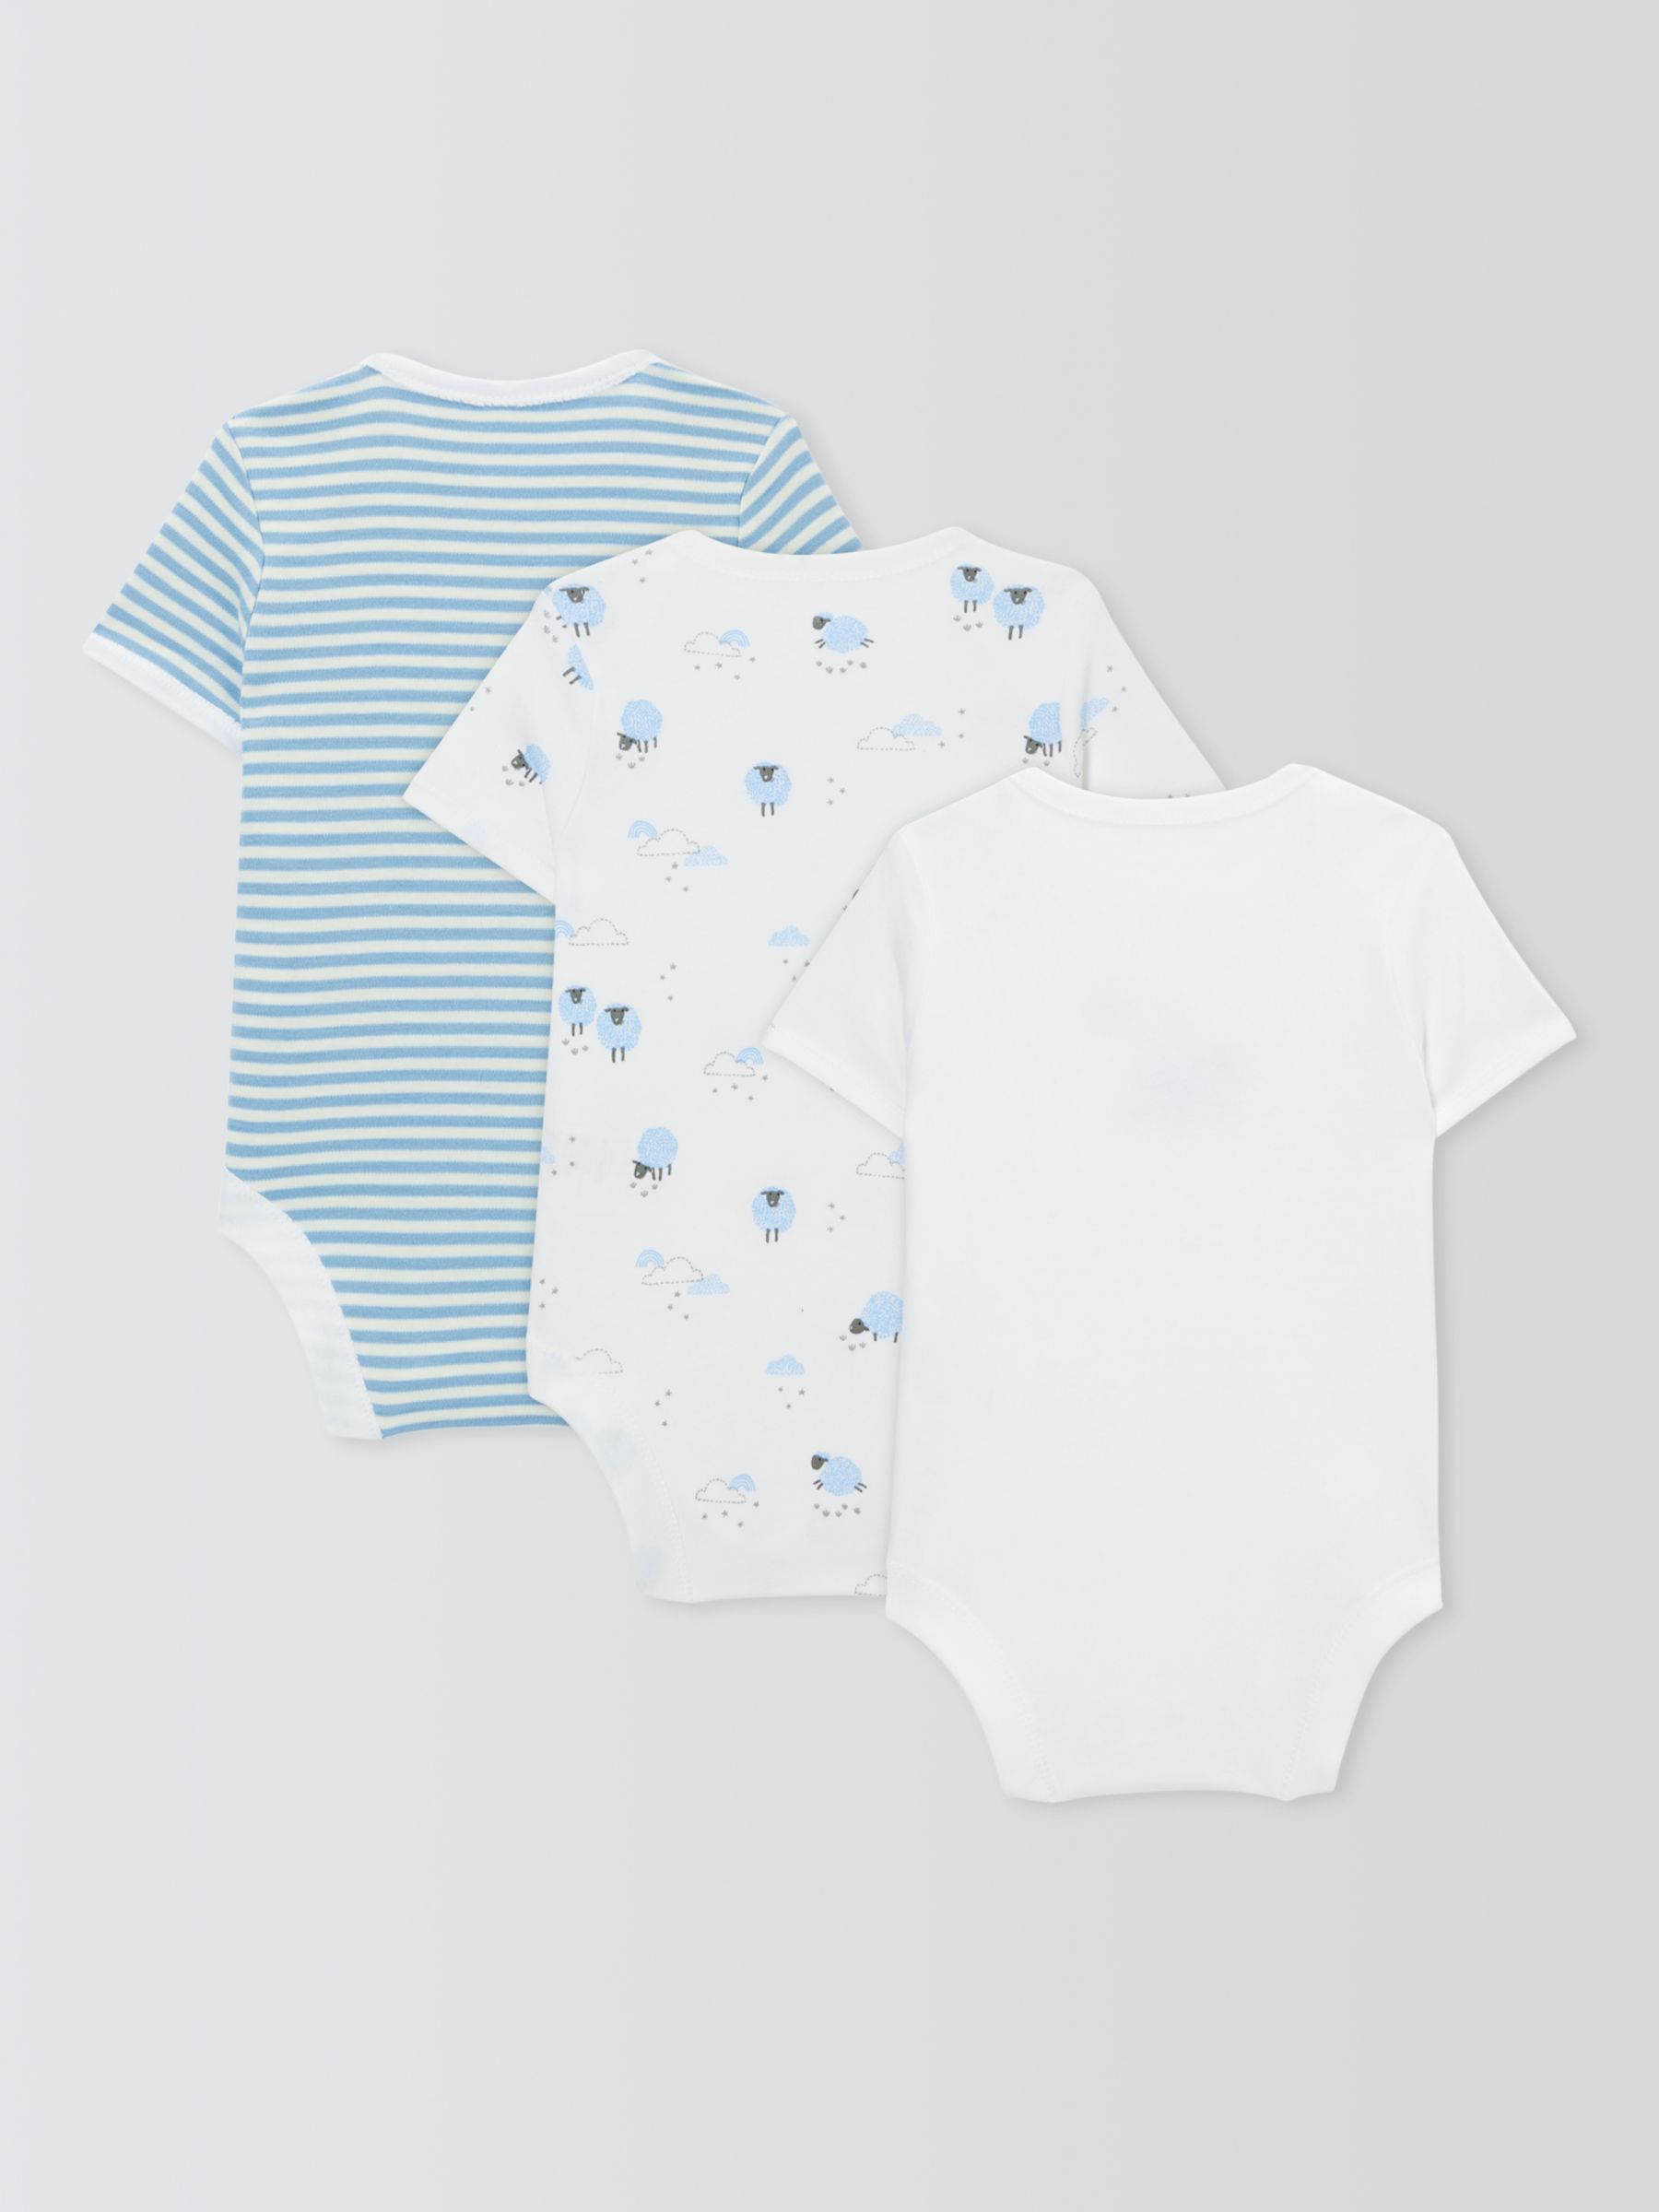 Primark Limited Baby Bodysuits Short Sleeve - Pack of 3 White